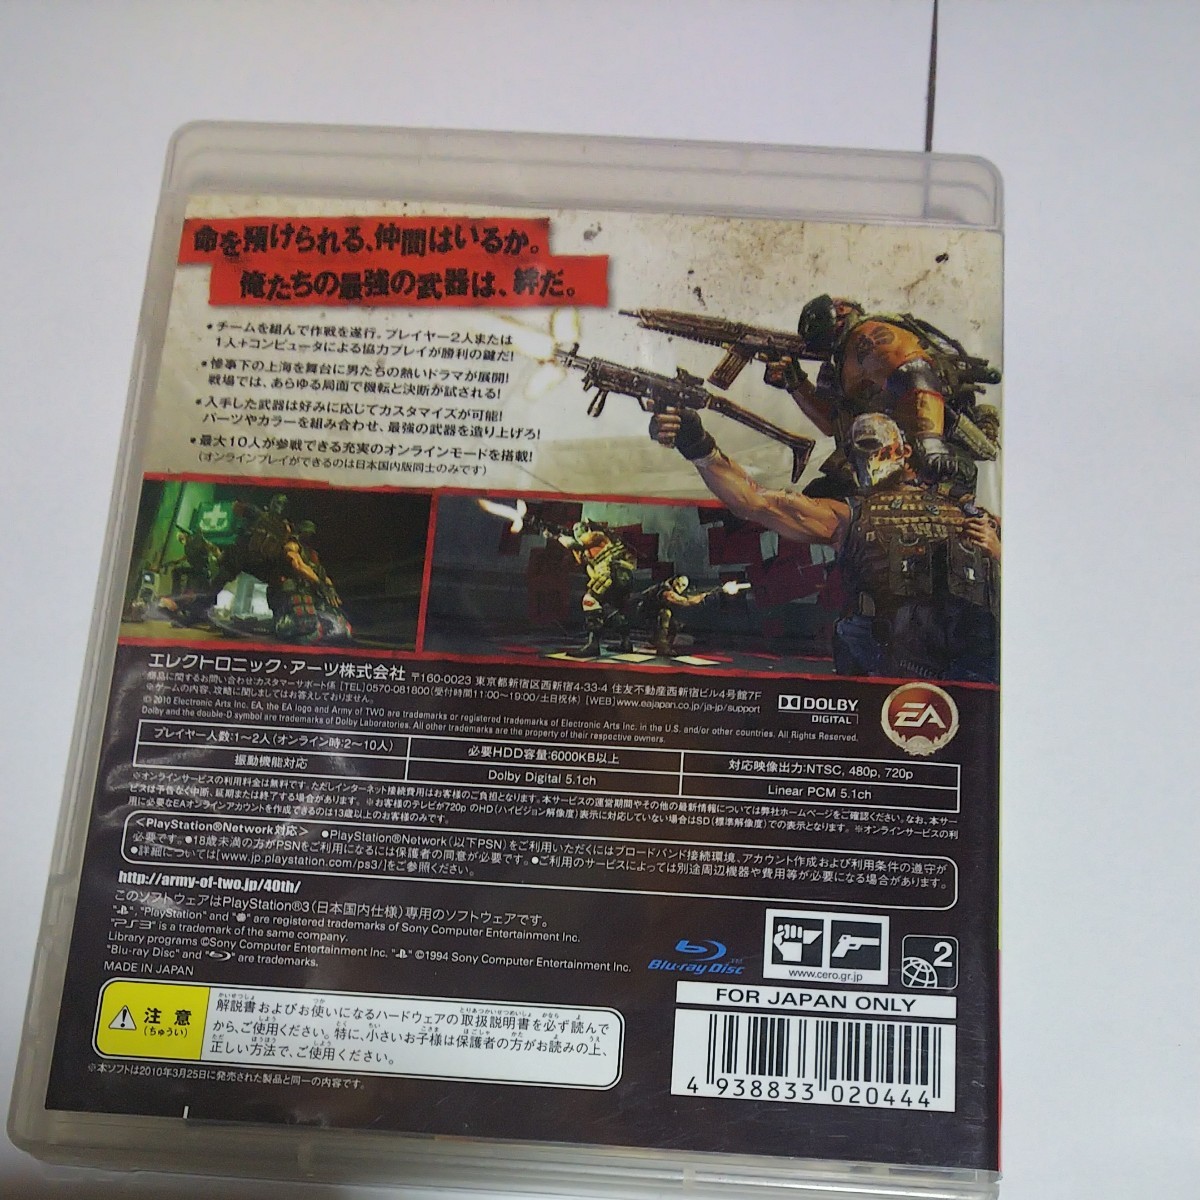 【PS3】 Army of Two ： The 40th Day [EA BEST HITS］